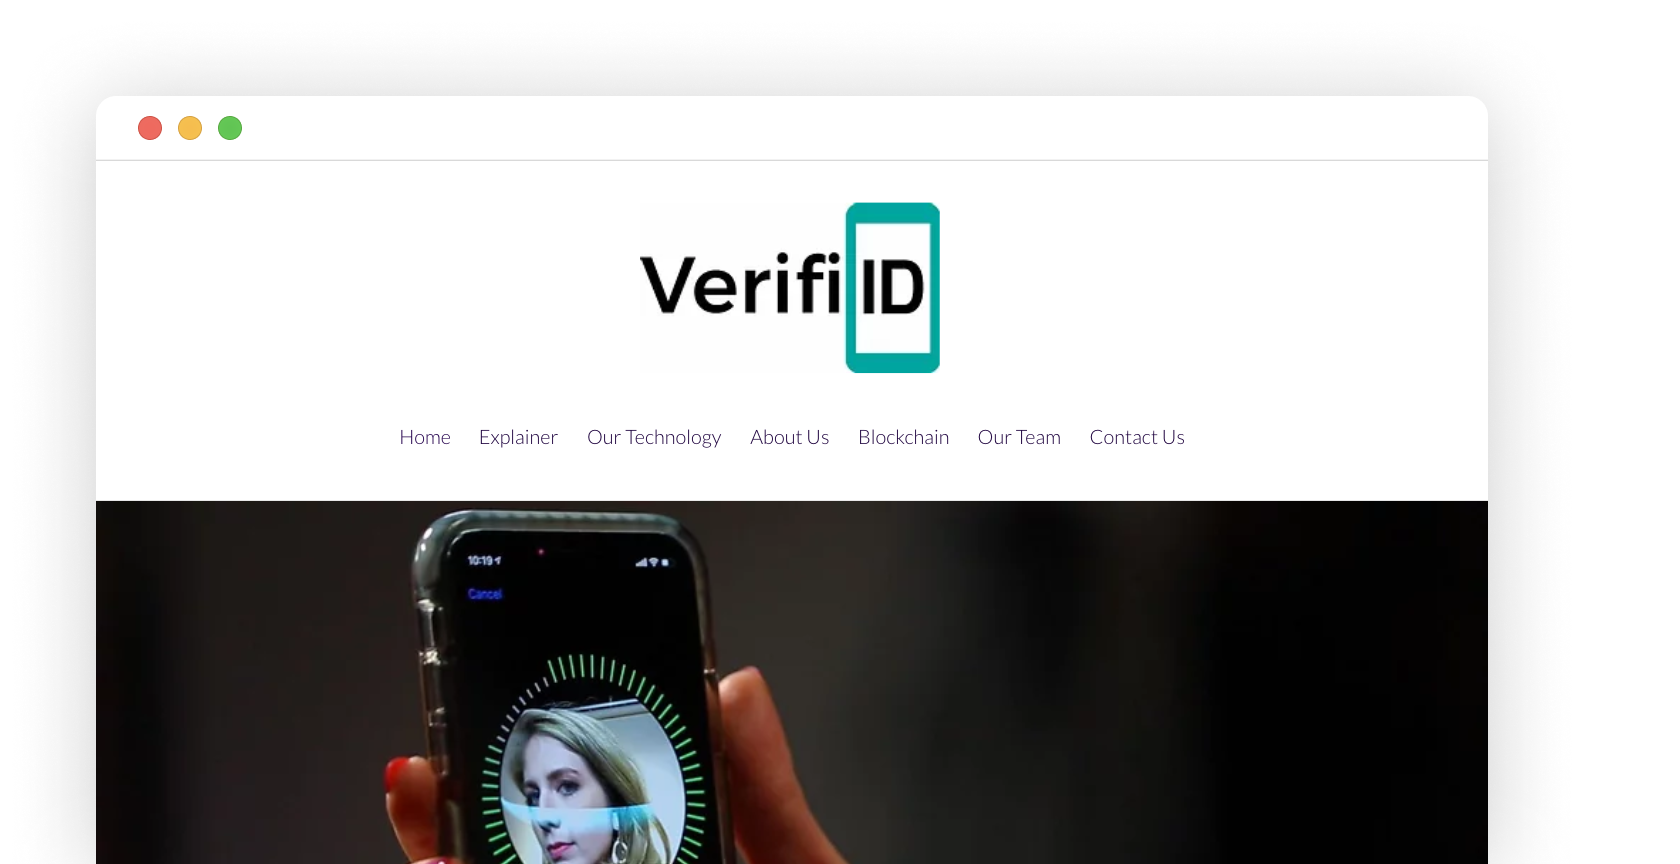 Home page of verifiID - logo, listed section of the page and picture of a mobile phone with a working application.